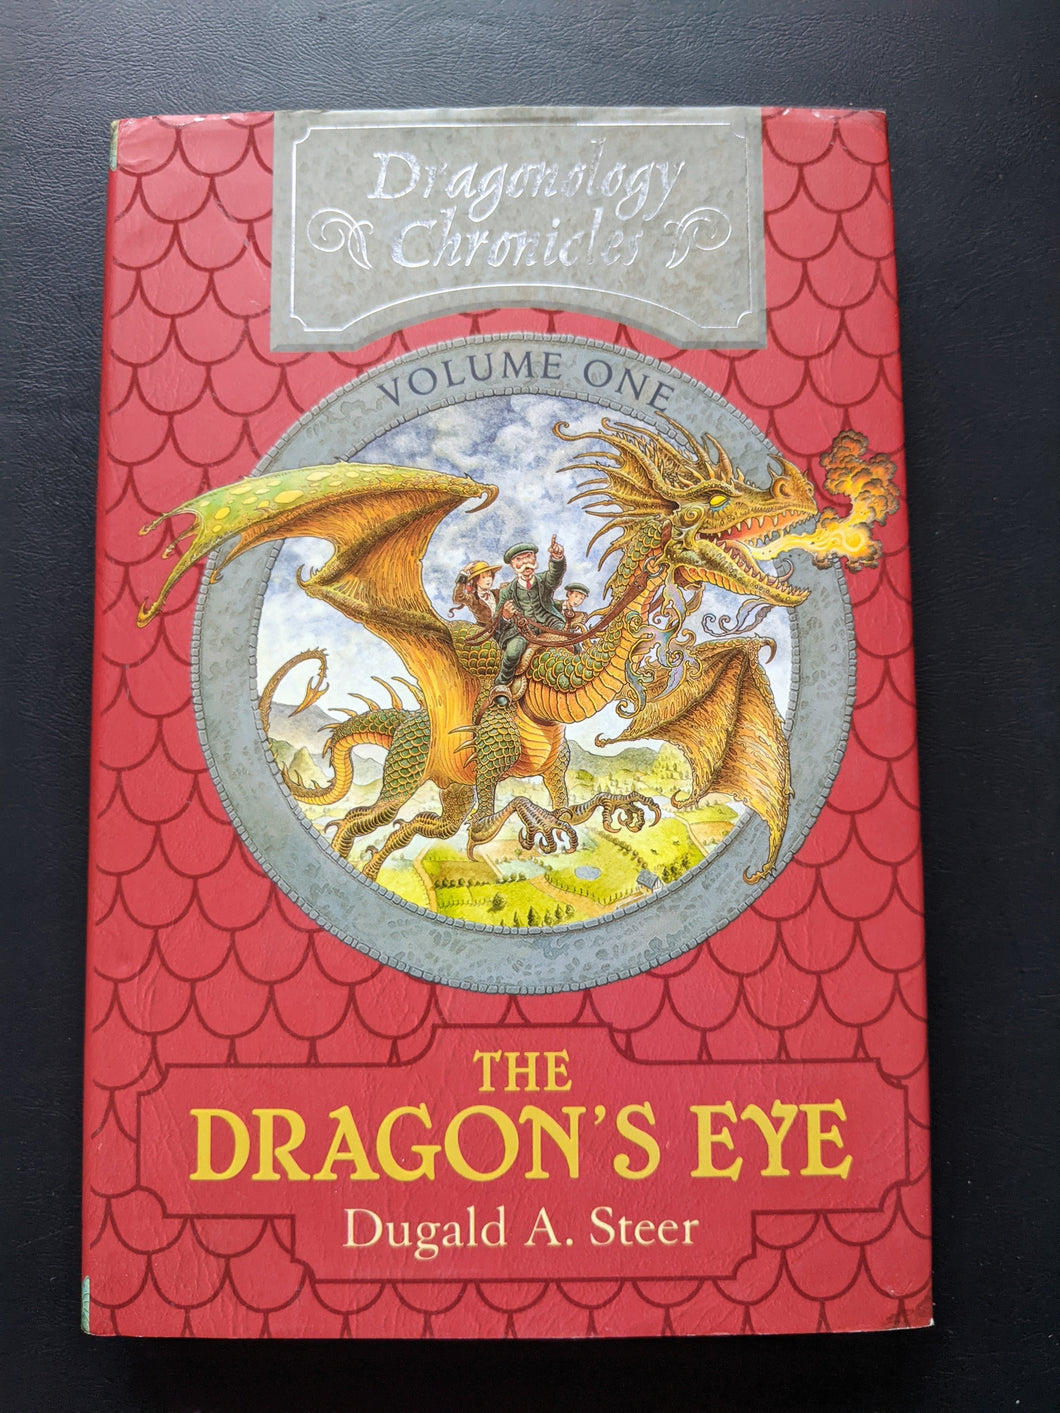 The Dragon's Eye: The Dragonology Chronicles, Volume One by Dugald A. Steer